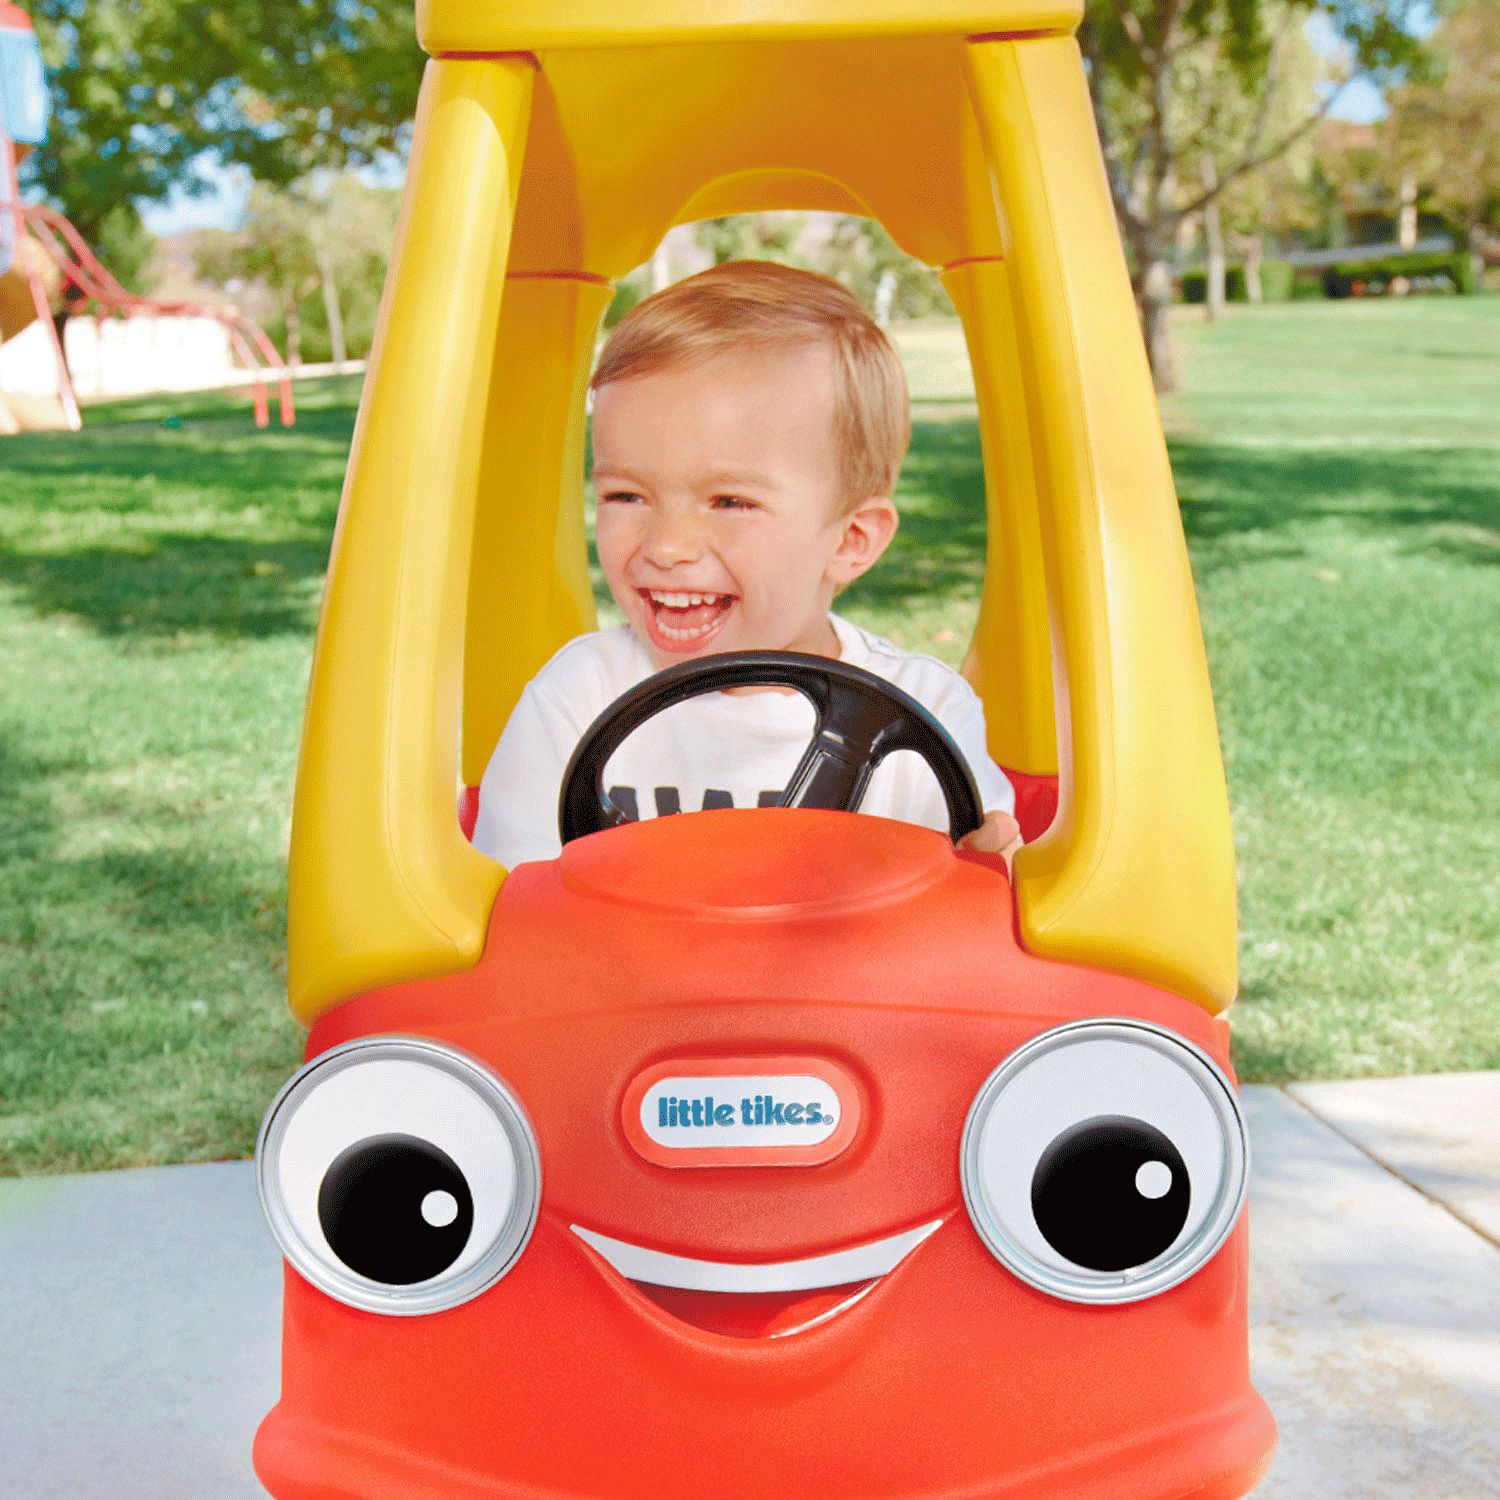 Little Tikes Cozy Coupe Ride On Toy for Toddlers and Kids 